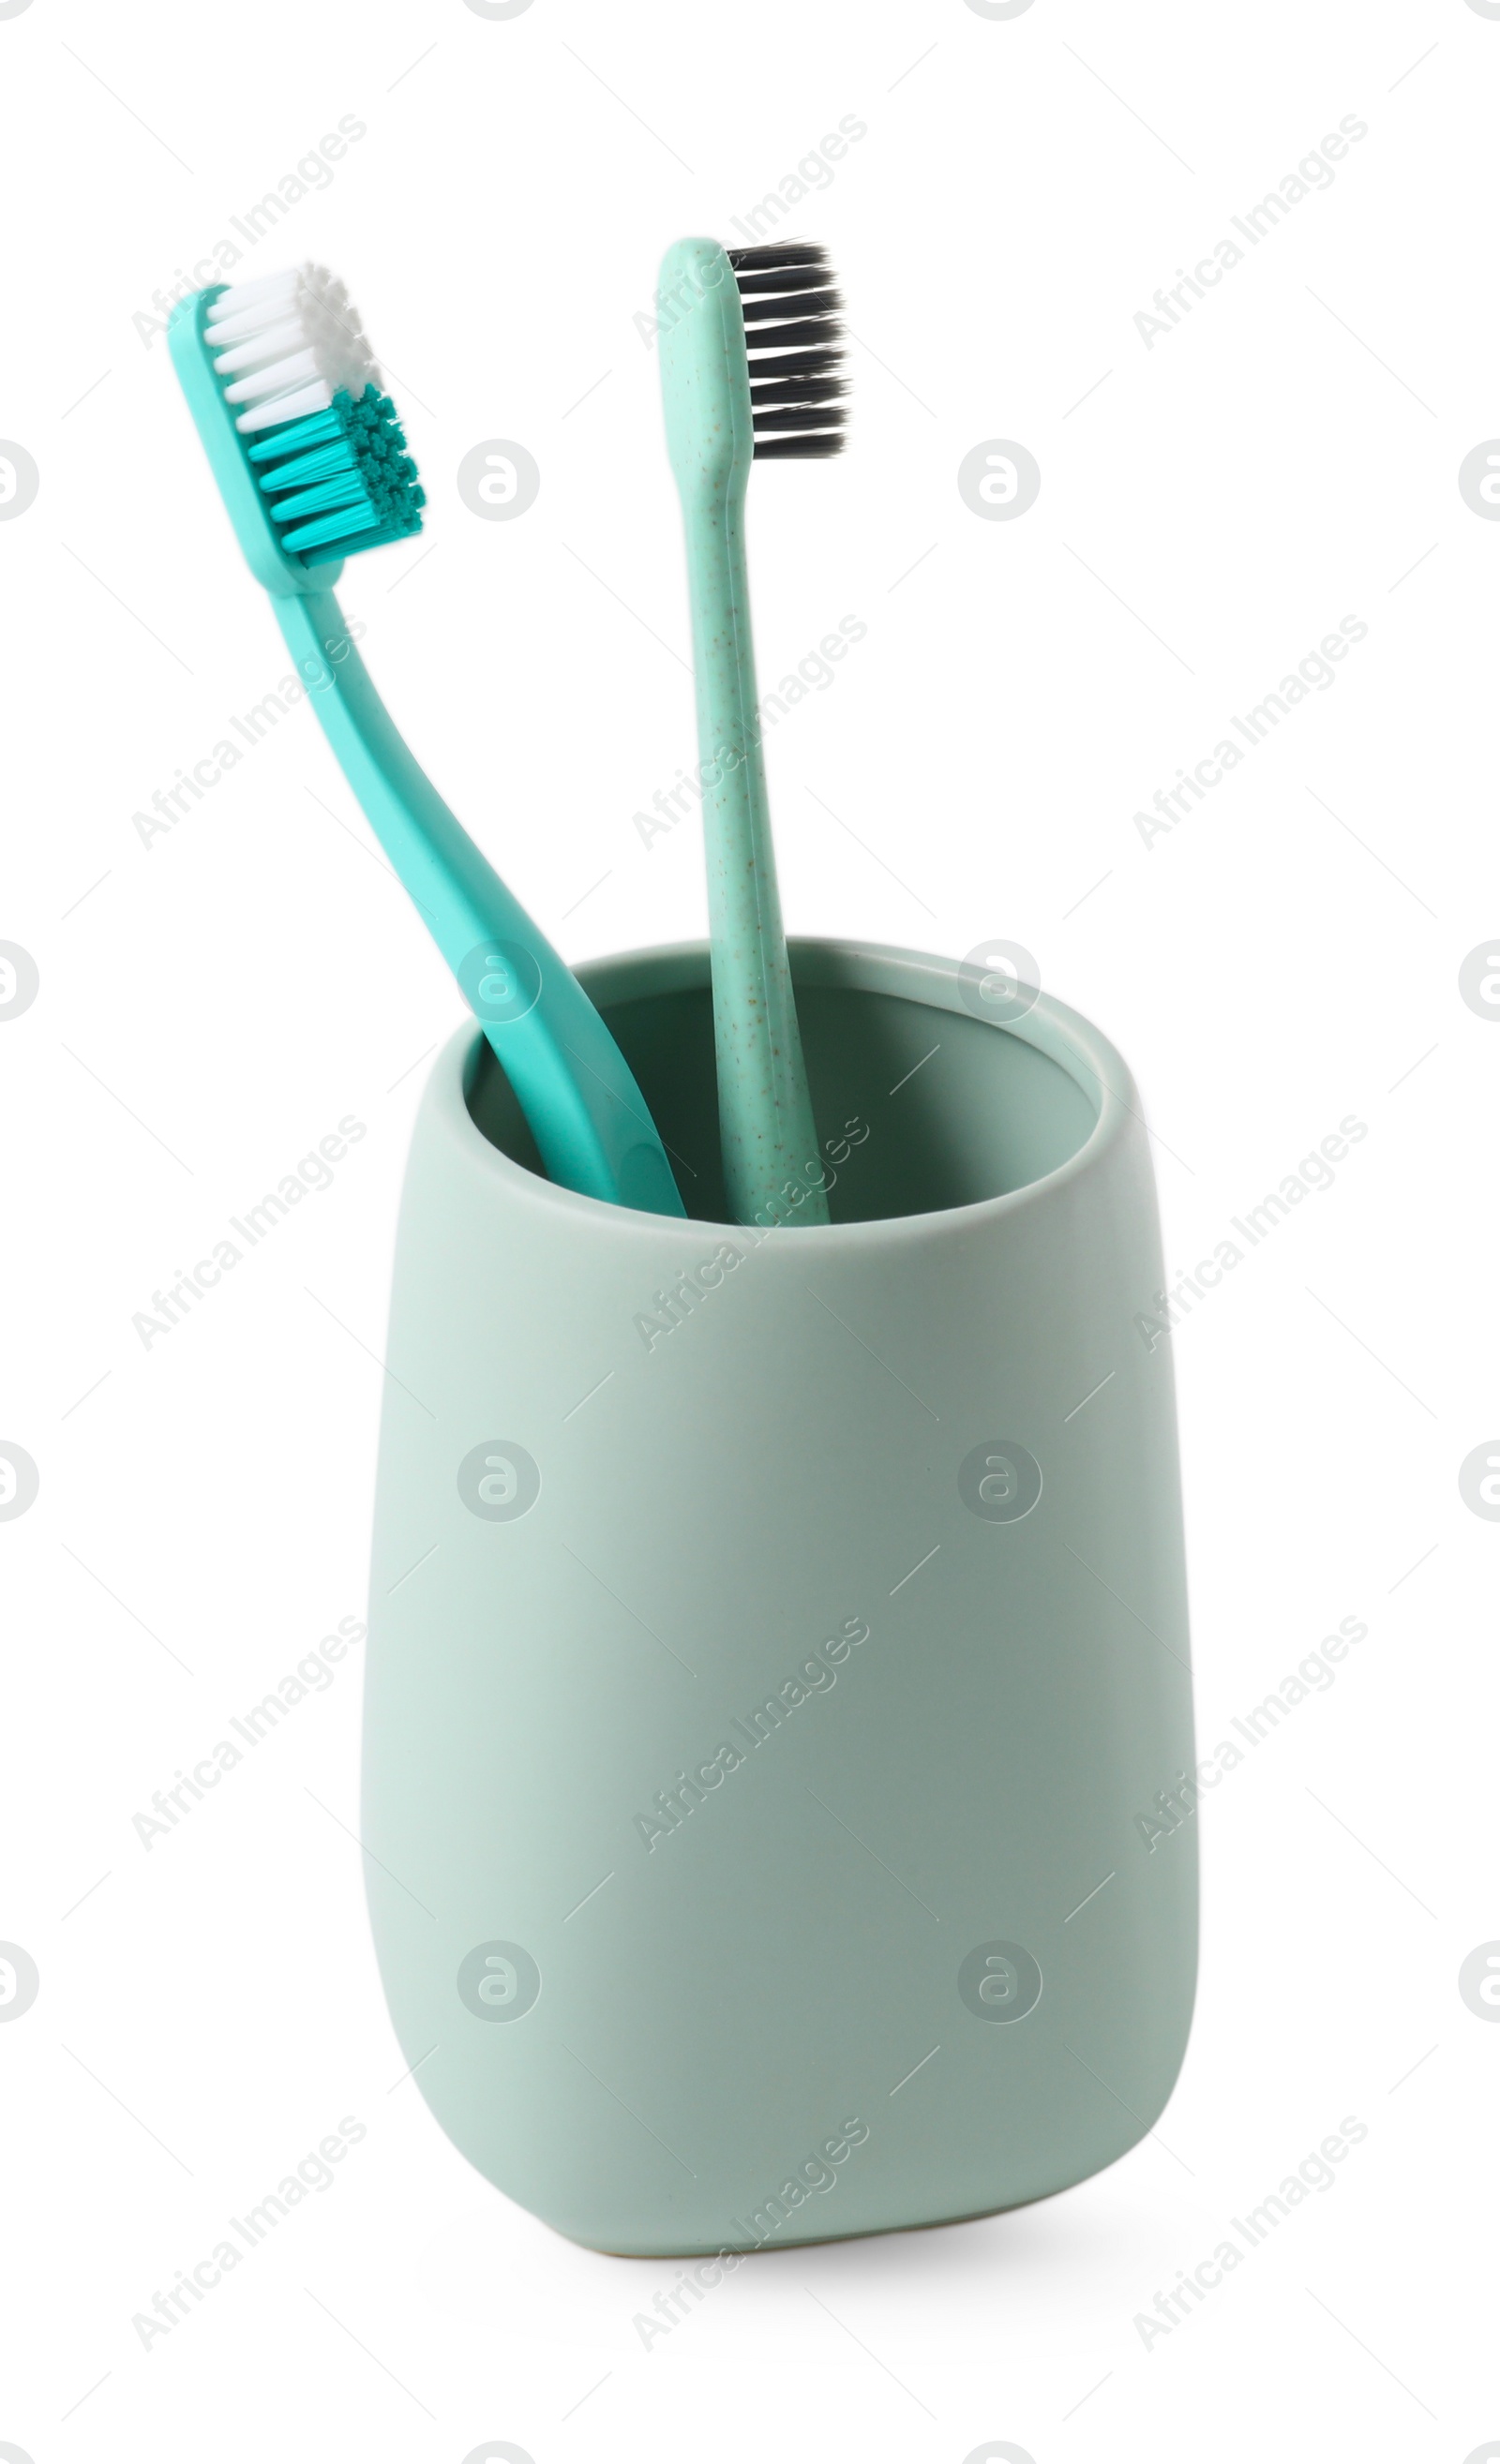 Photo of Bath accessory. Ceramic holder with toothbrushes isolated on white